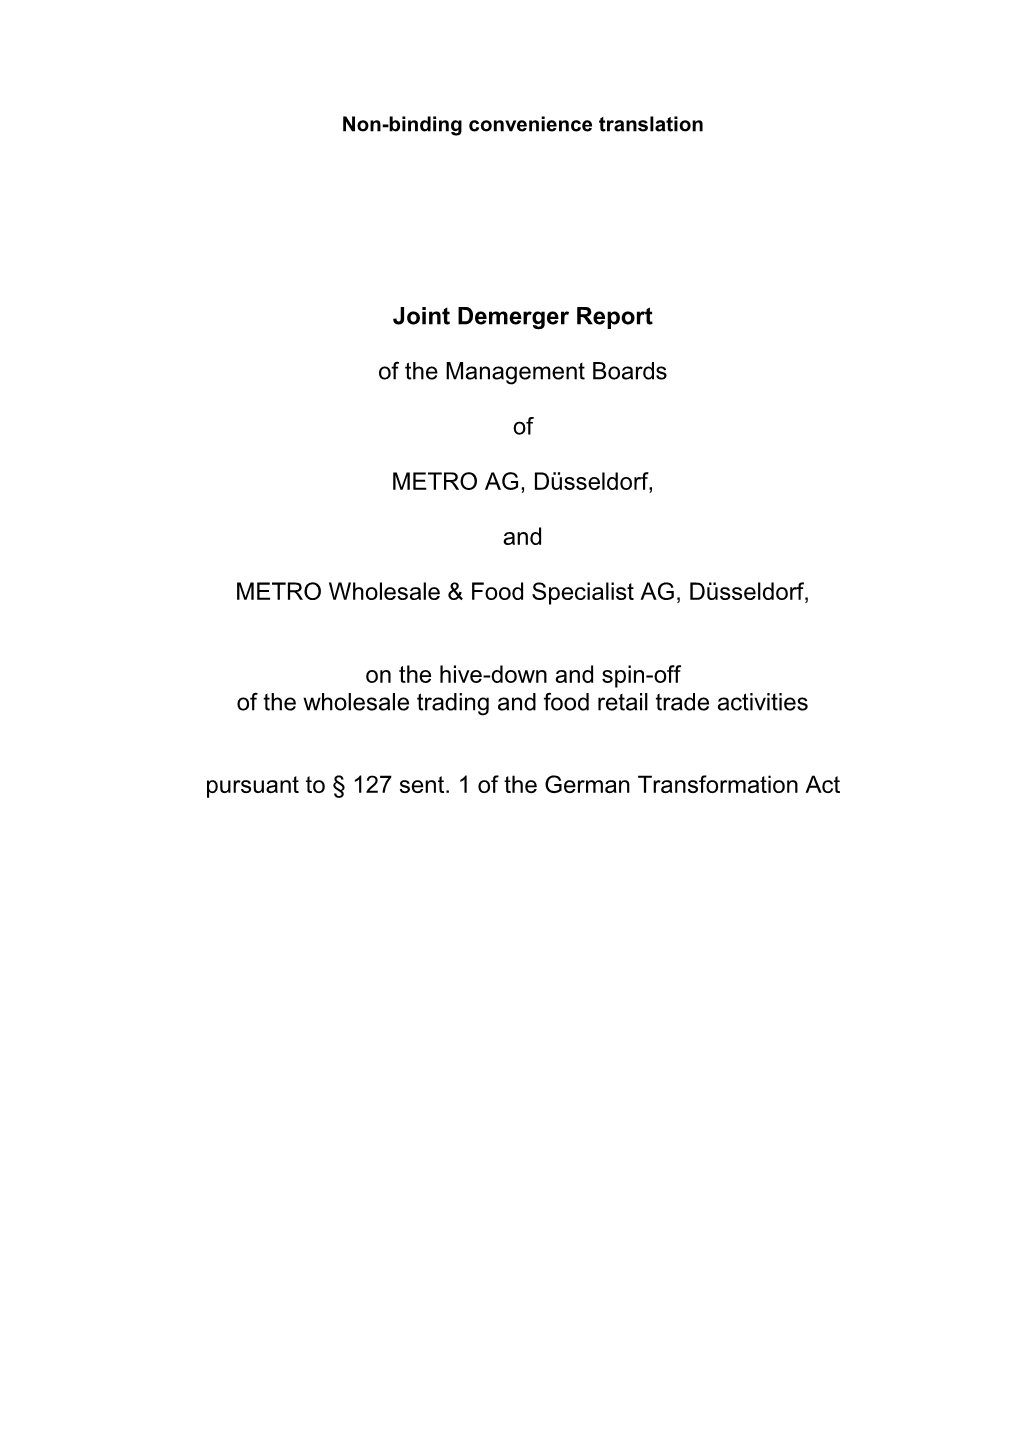 Joint Demerger Report of the Management Boards